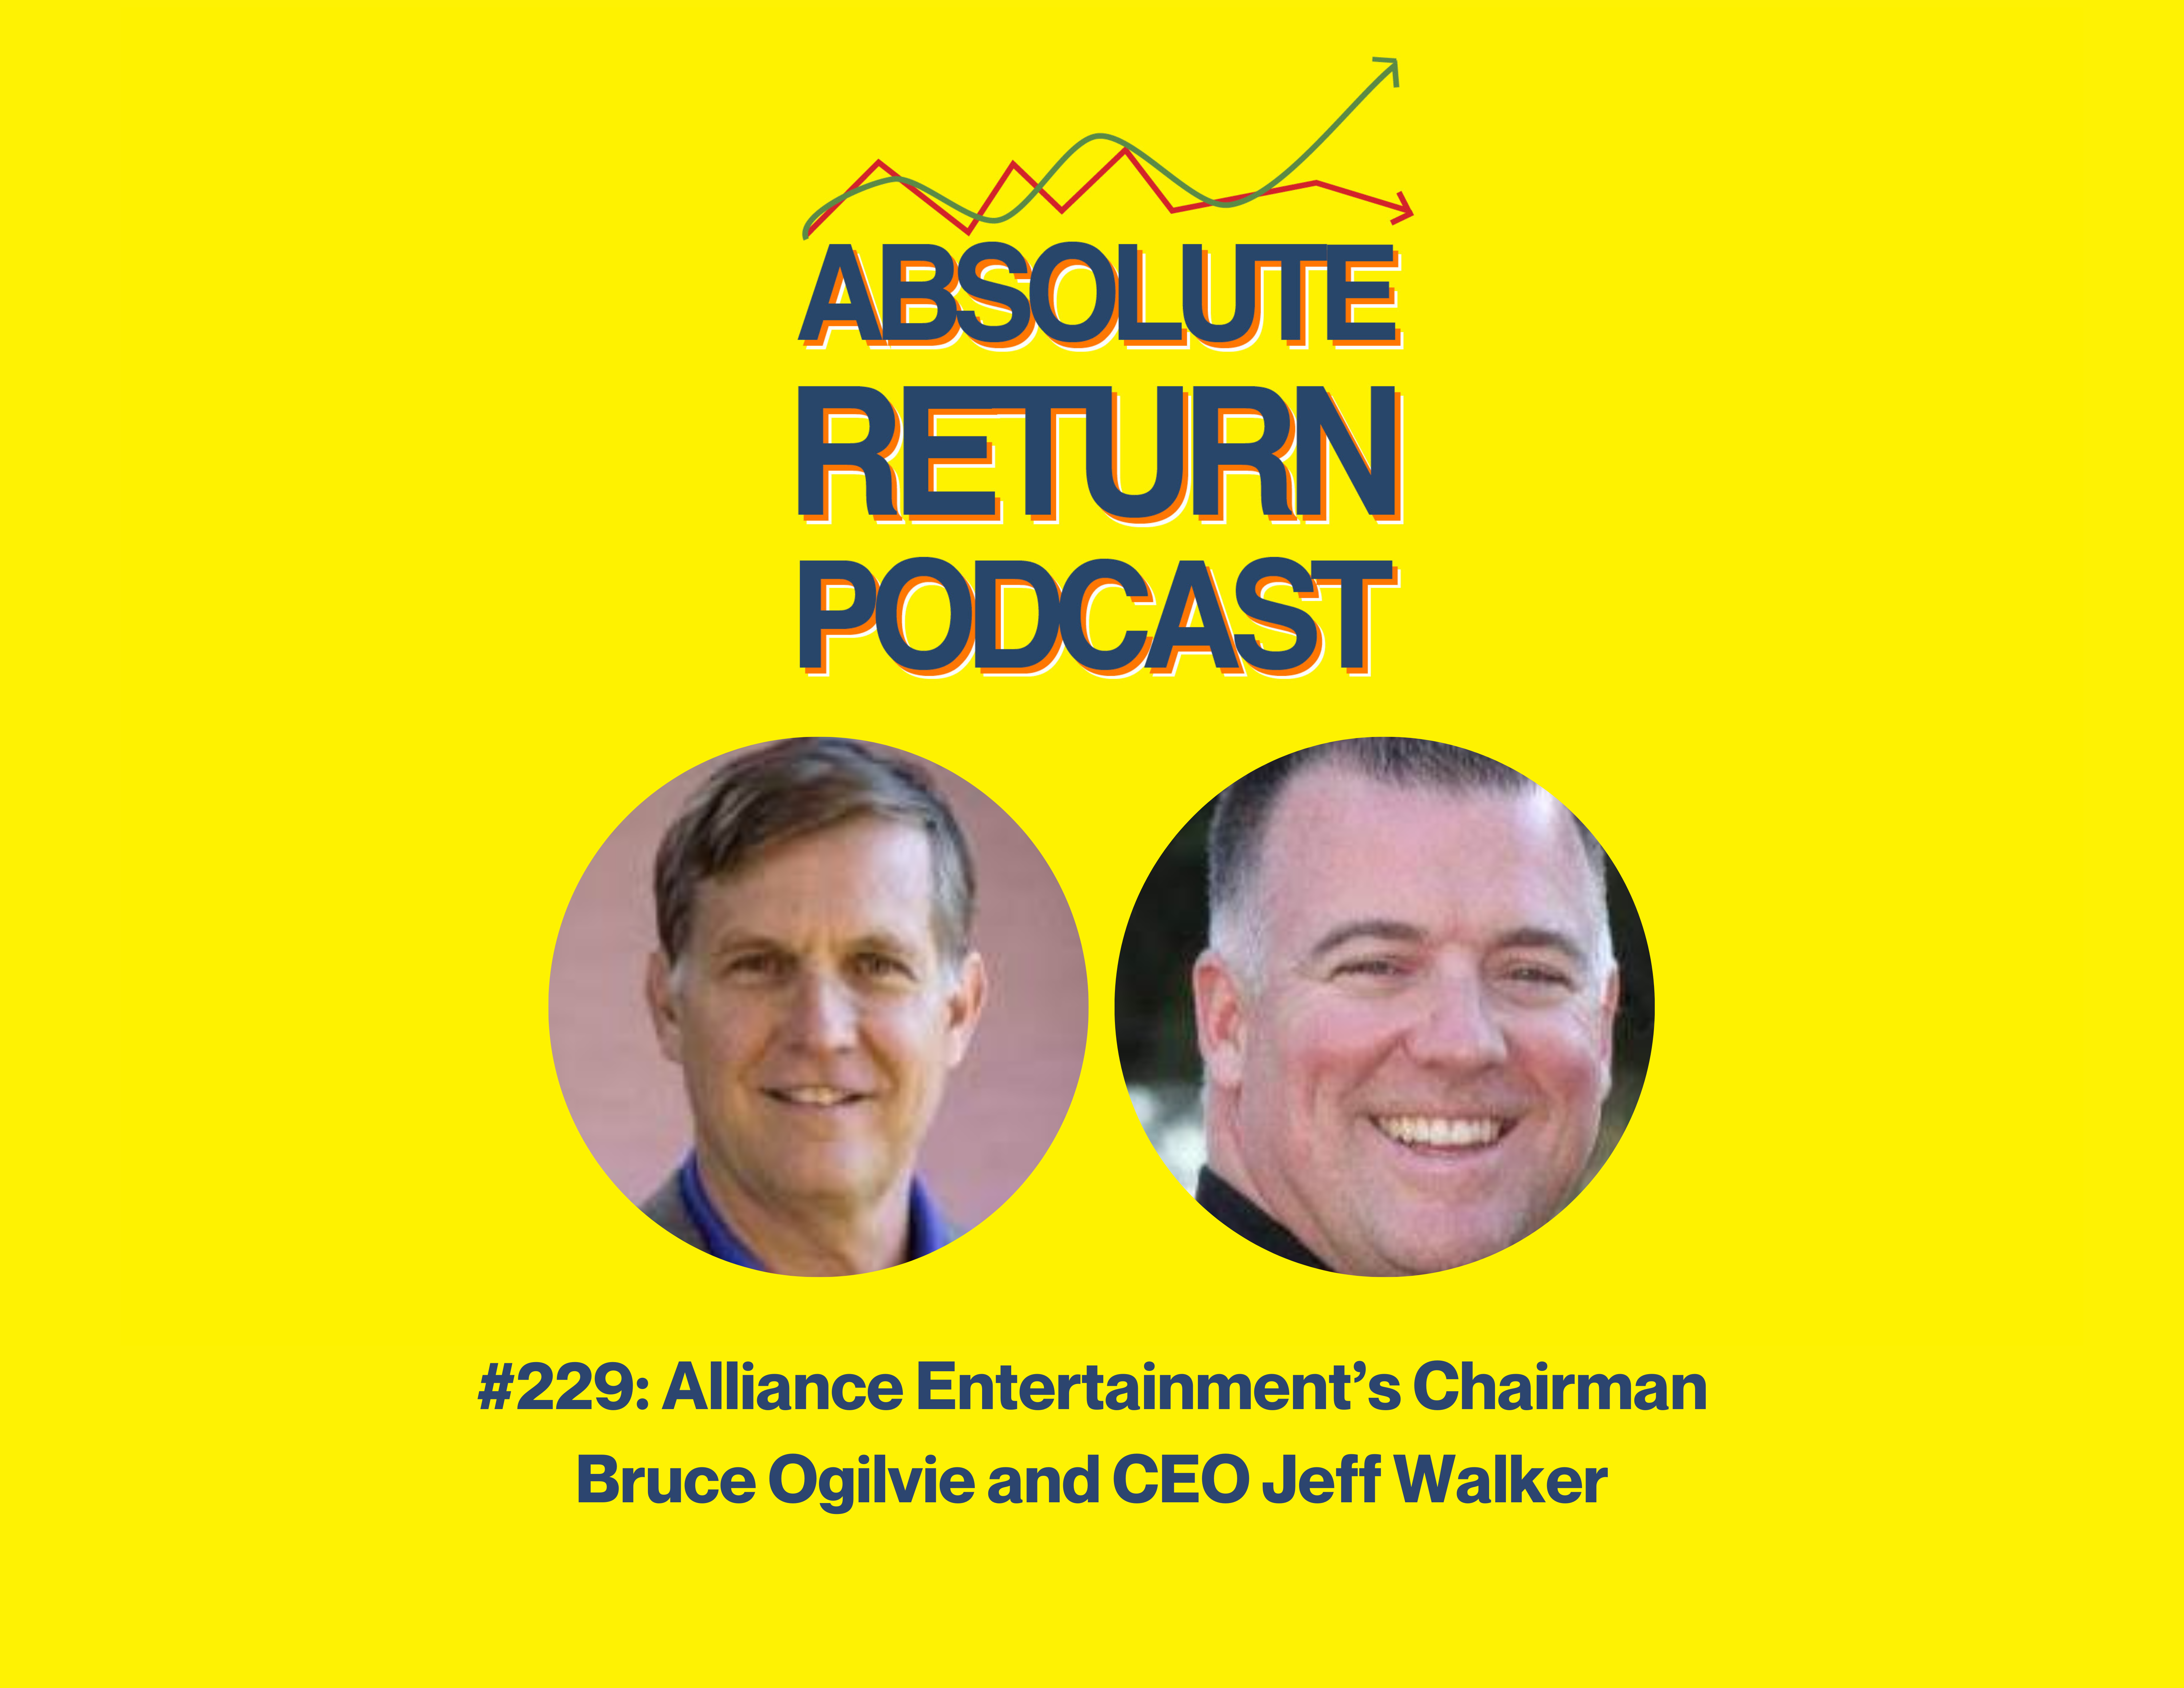 Absolute Return Podcast #229: Alliance Entertainment’s Chairman Bruce Ogilvie and CEO Jeff Walker